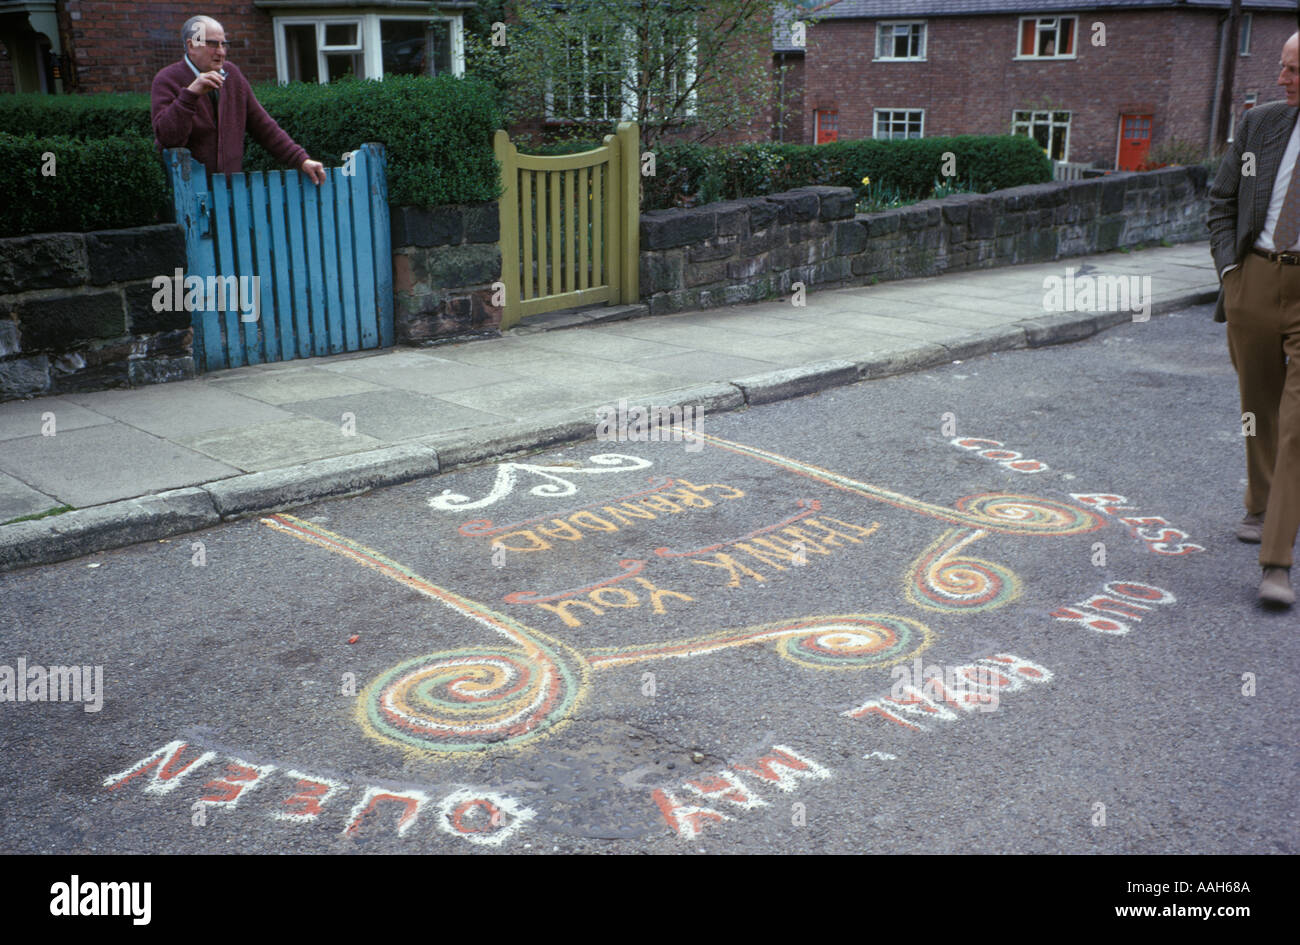 Royal May Queen Celebrations Sand Painting local tradition Knutsford Cheshire.UKCheshire England. 'God Bless our Royal May Queen' UK 1970s Grandfather Stock Photo